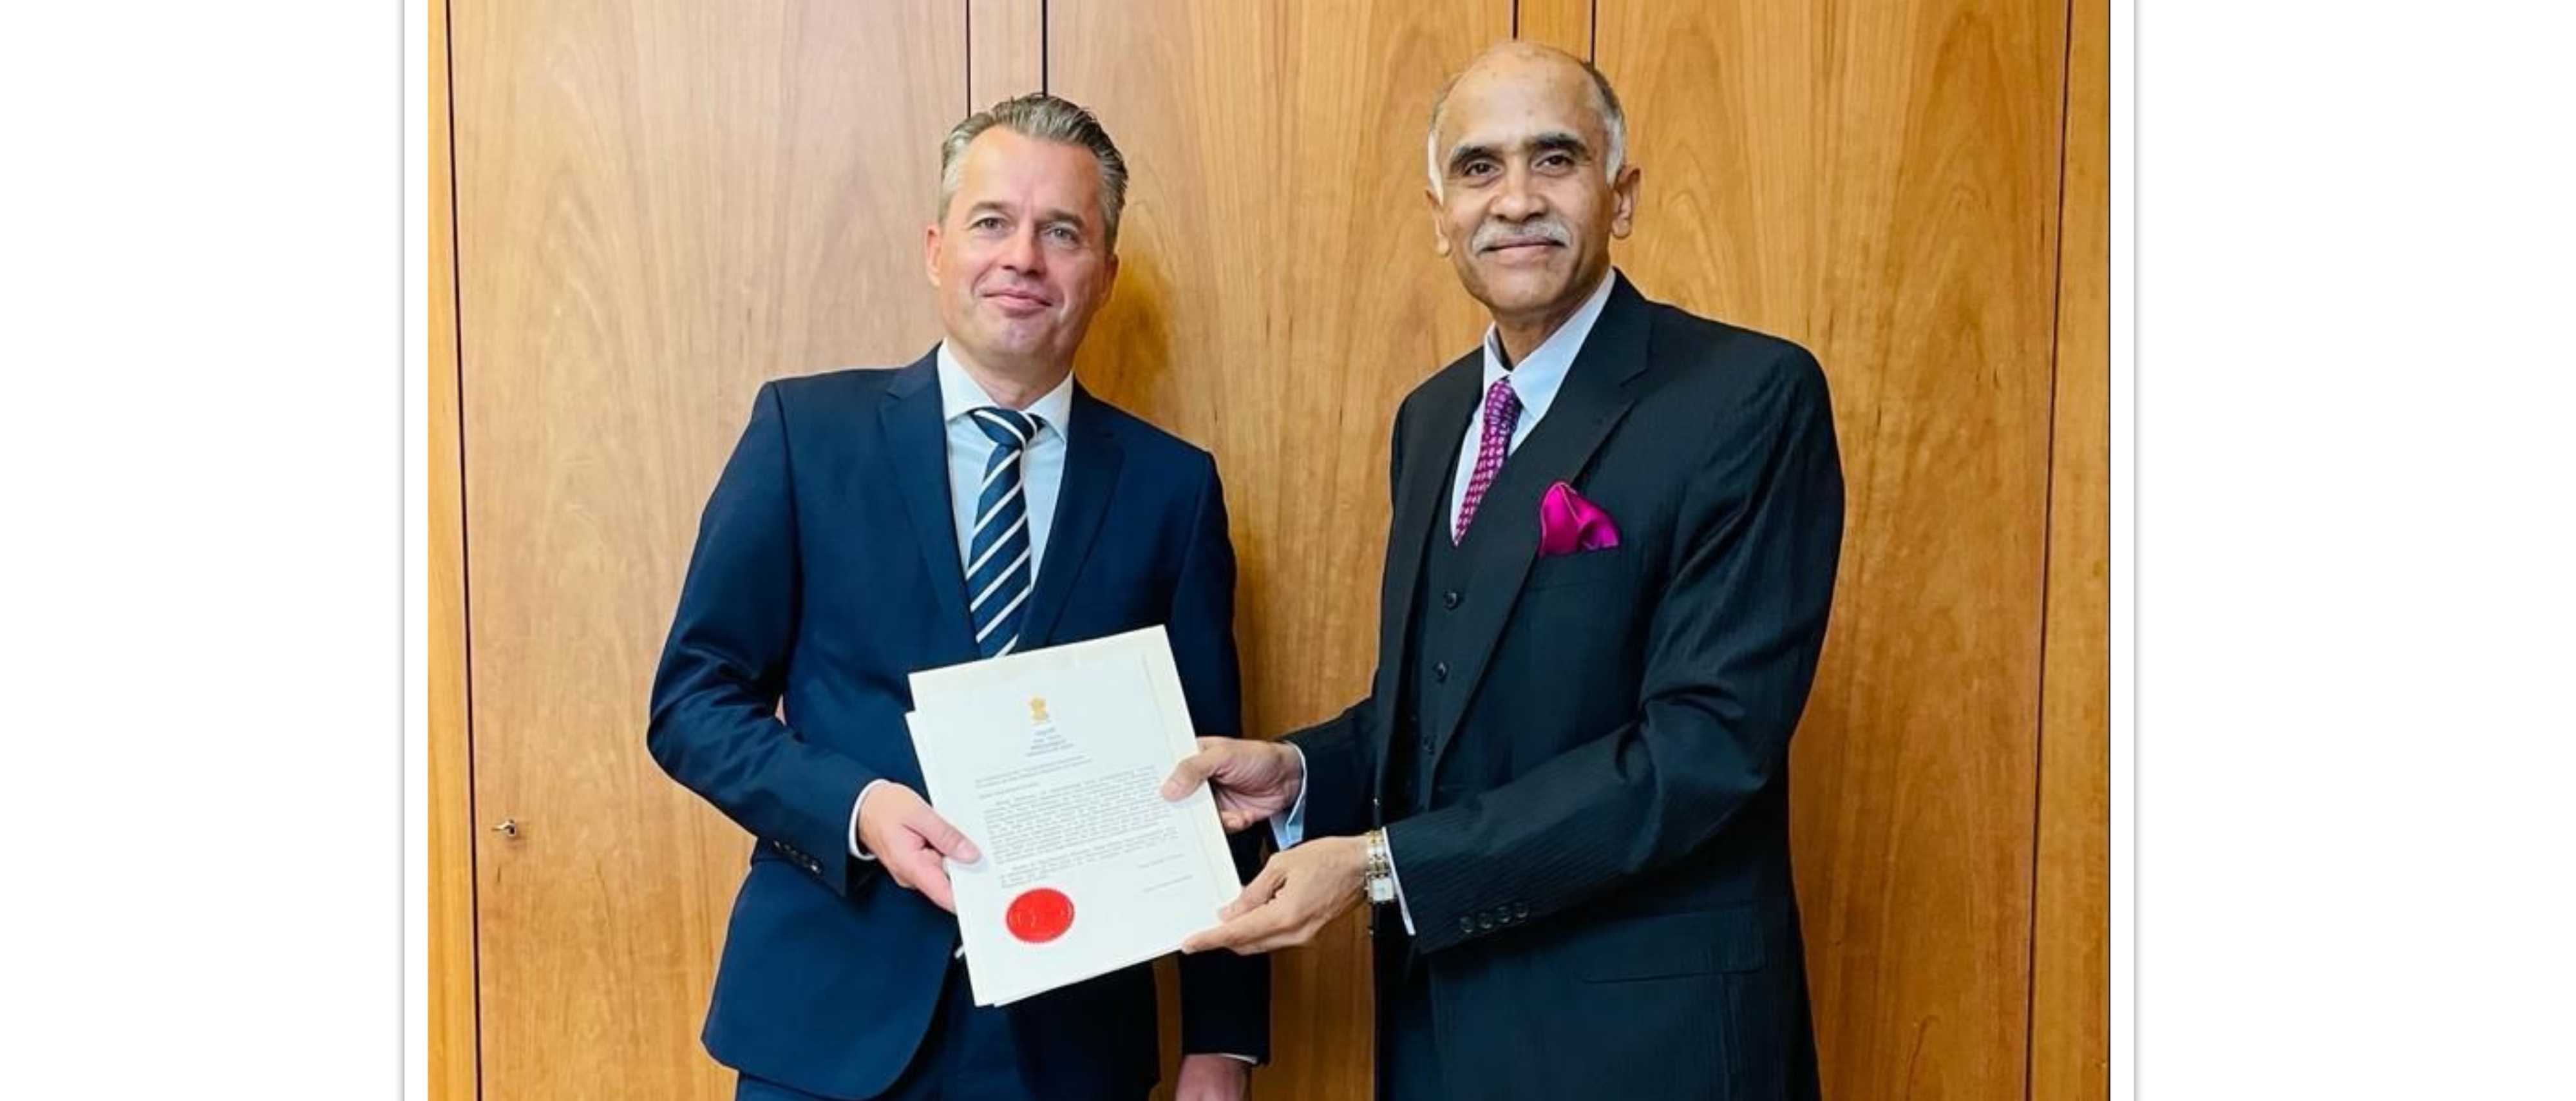  Ambassador-designate P. Harish presents a copy of the Letter of Credence to acting Chief of Protocol Felix Schwarz at the German Foreign Office